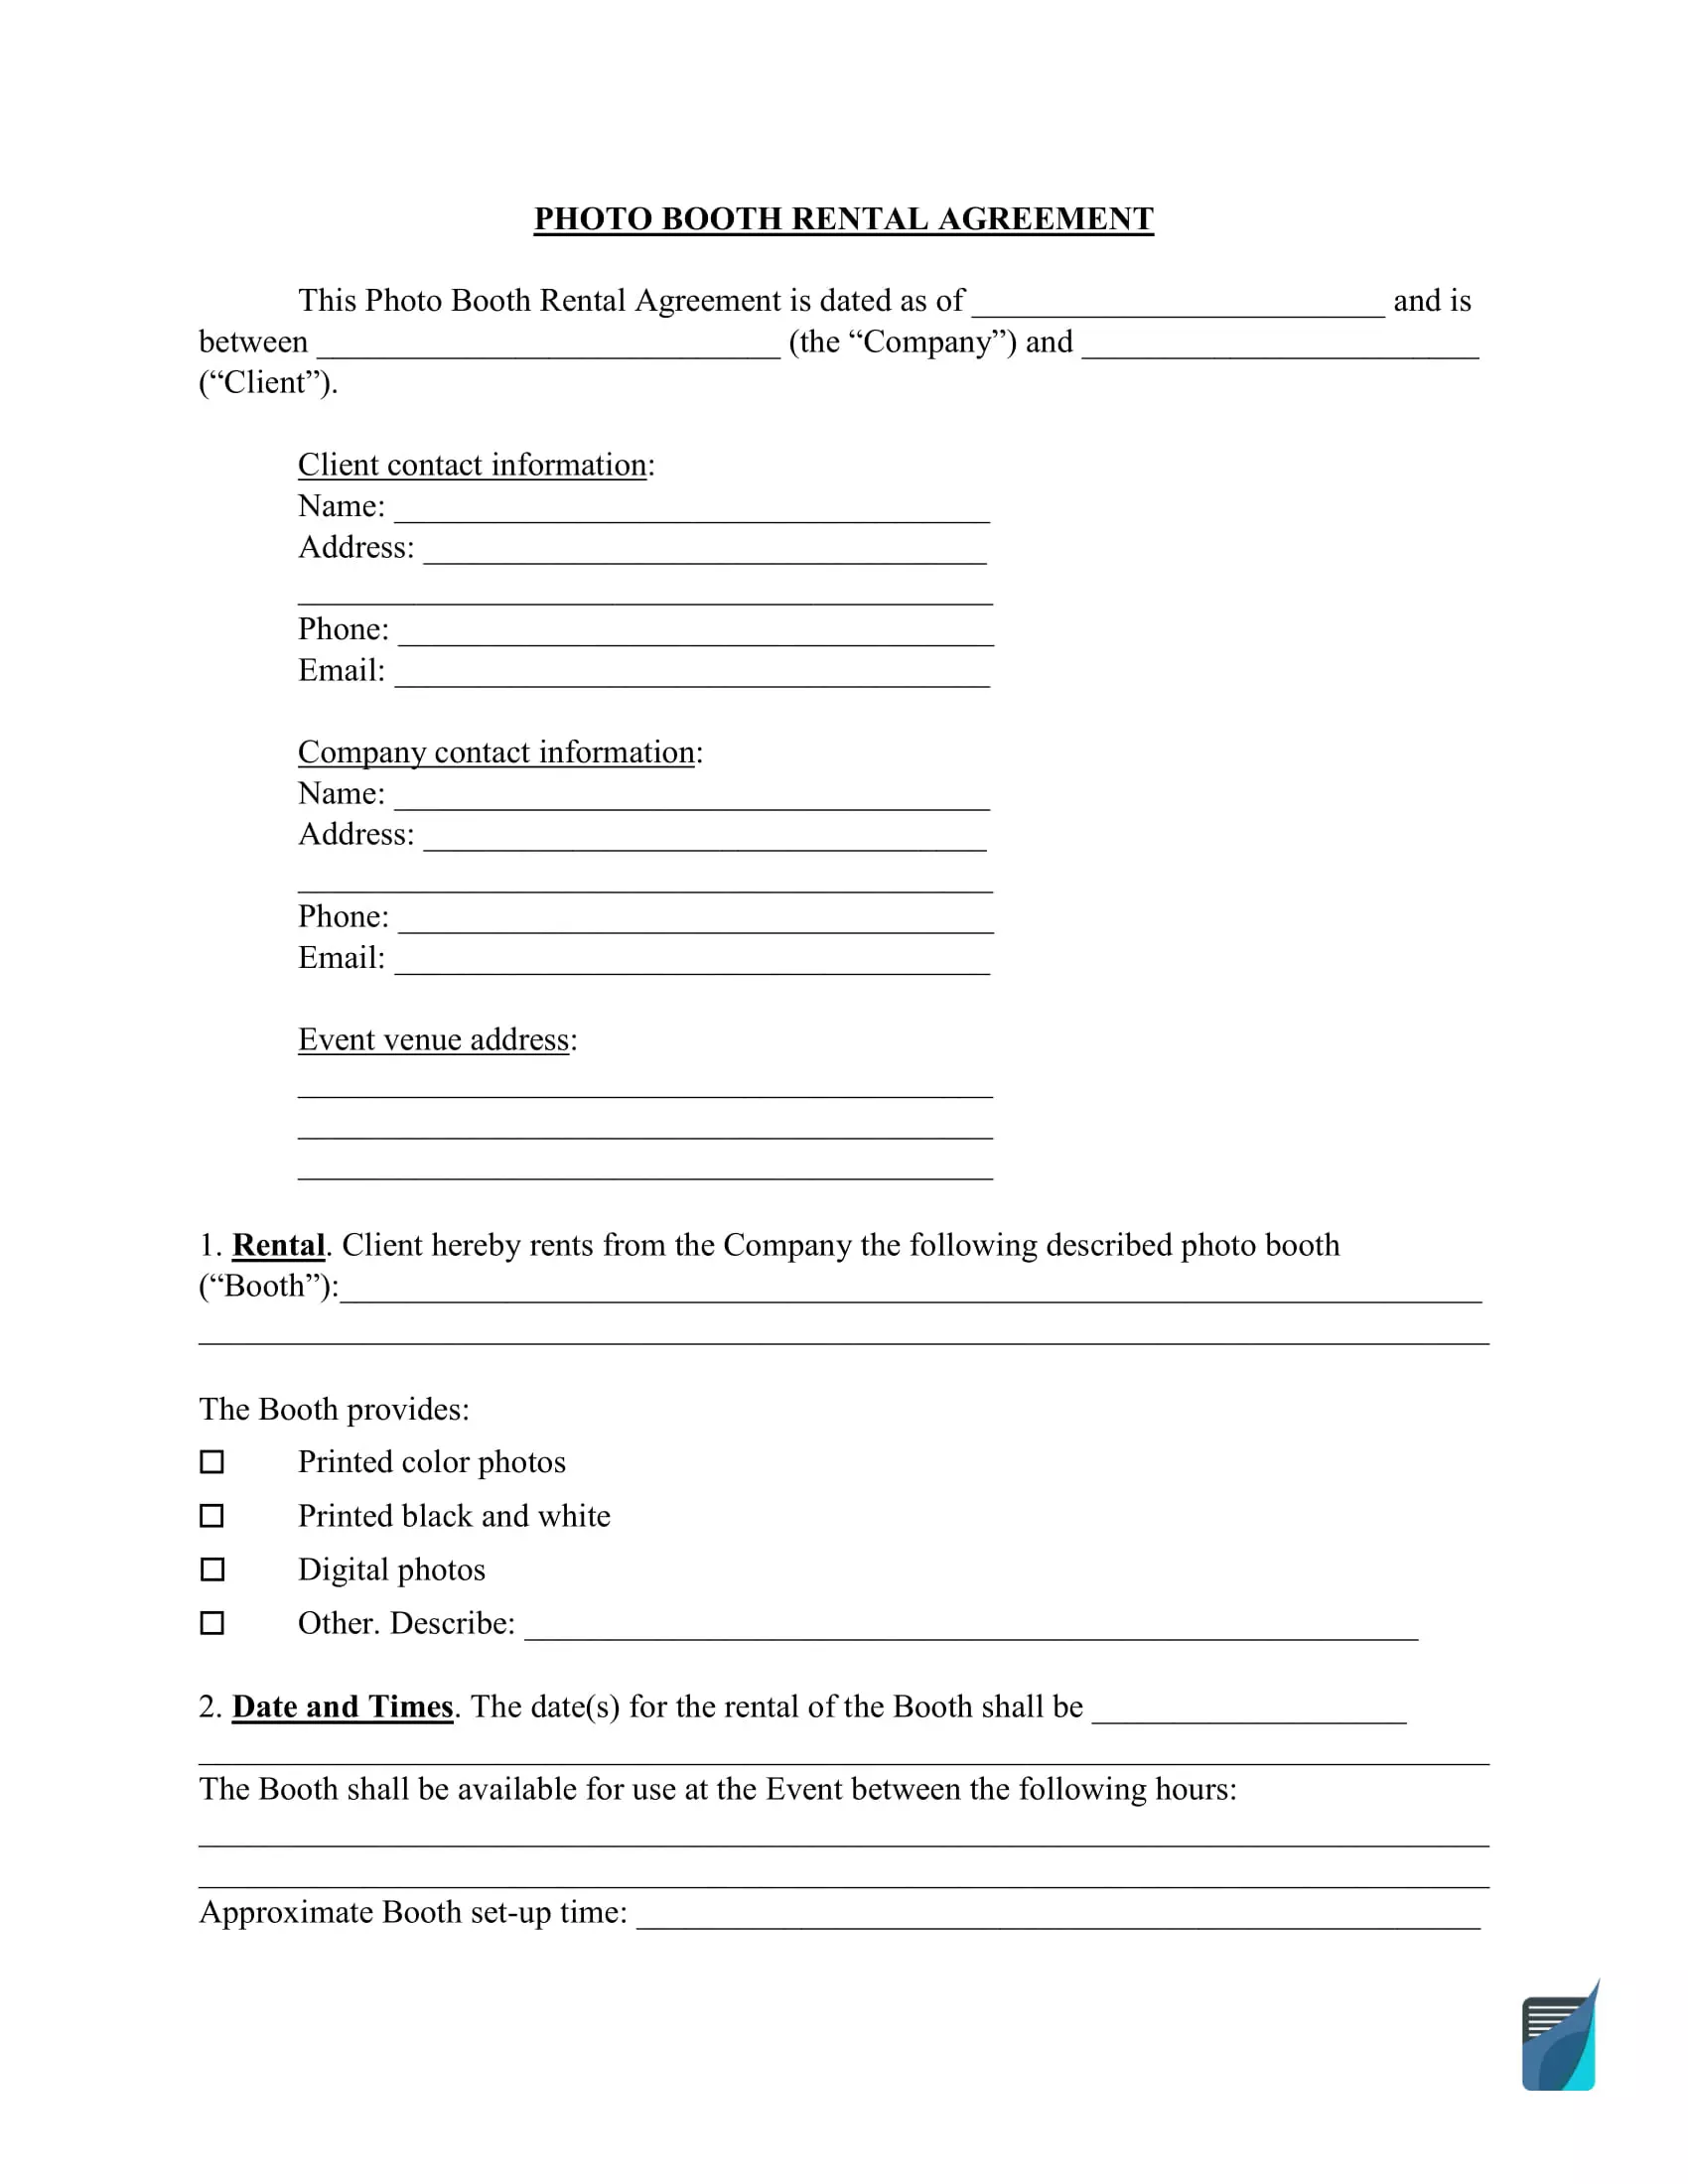 Photo Booth Rental Agreement Form